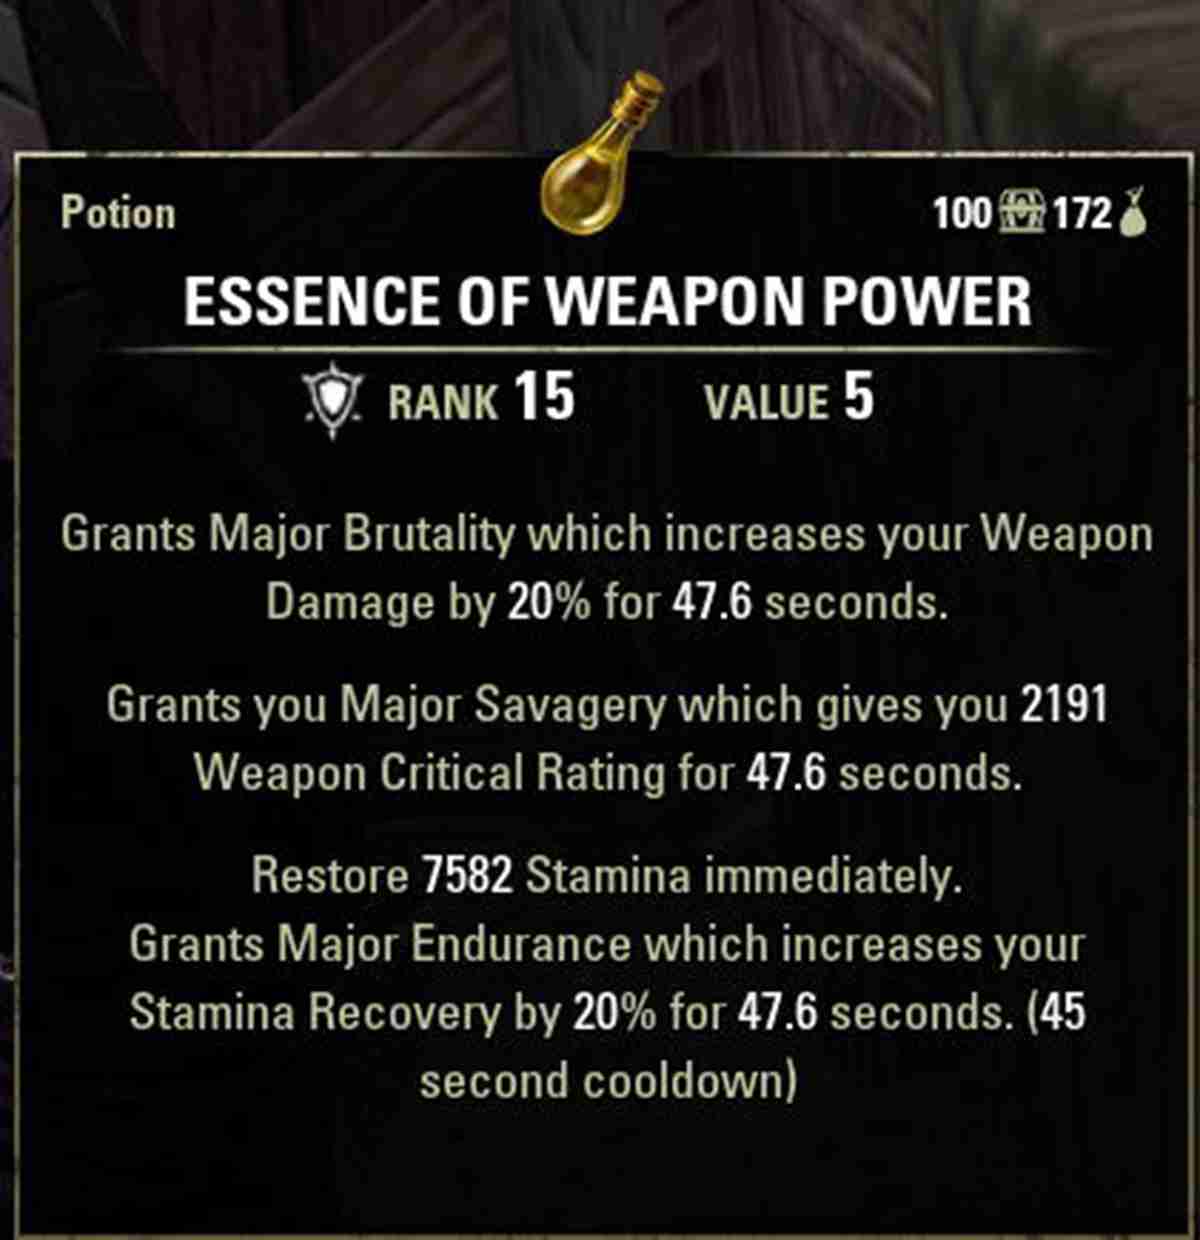 5 Best Potions in ESO - Essence of Weapon Power